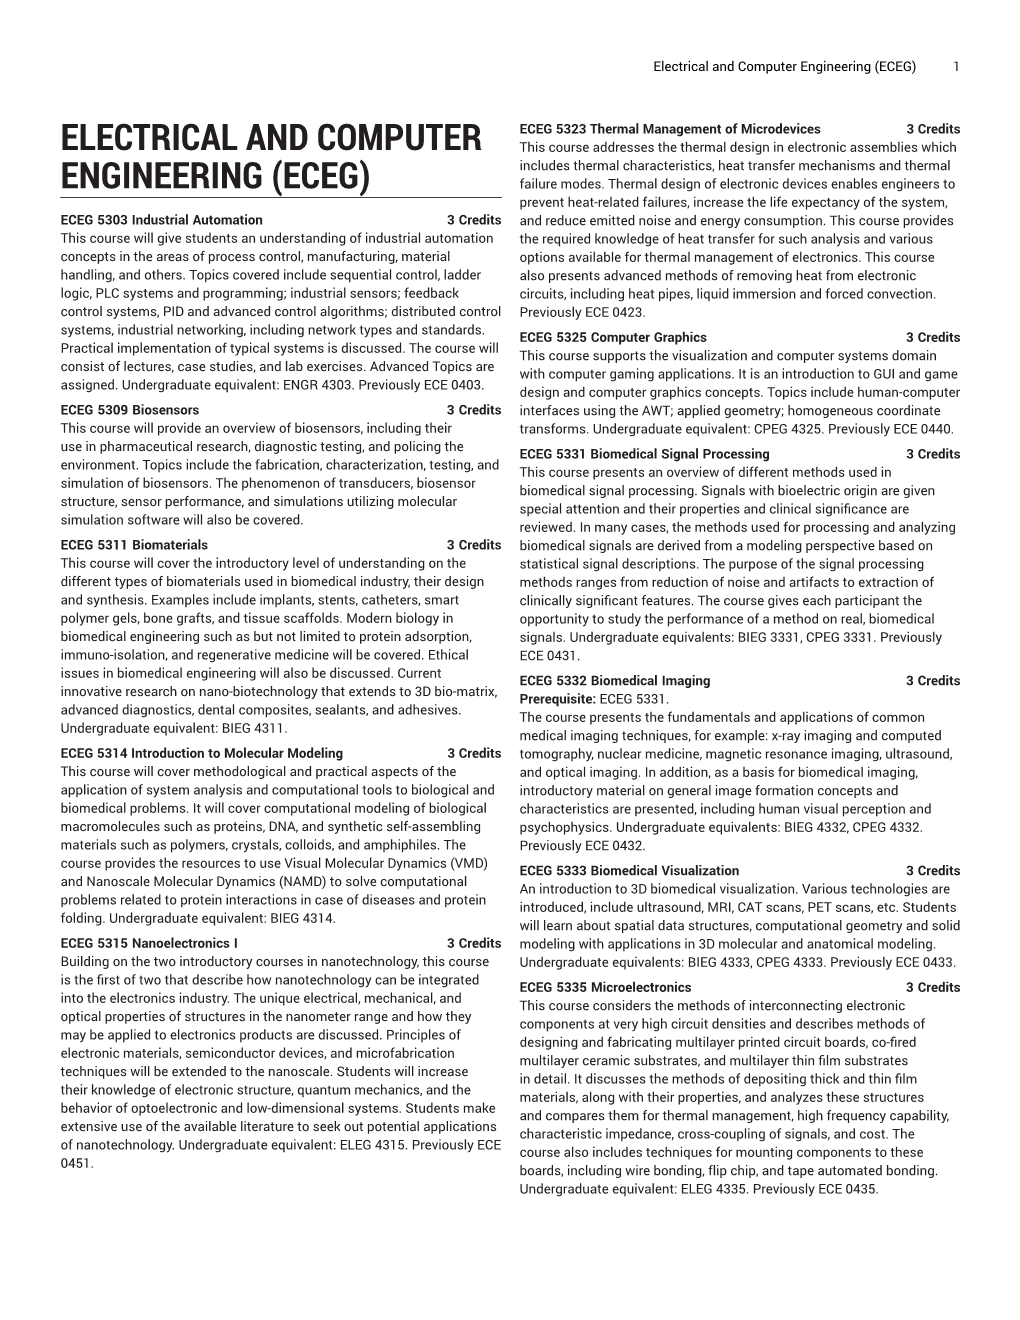 Electrical and Computer Engineering (ECEG) 1